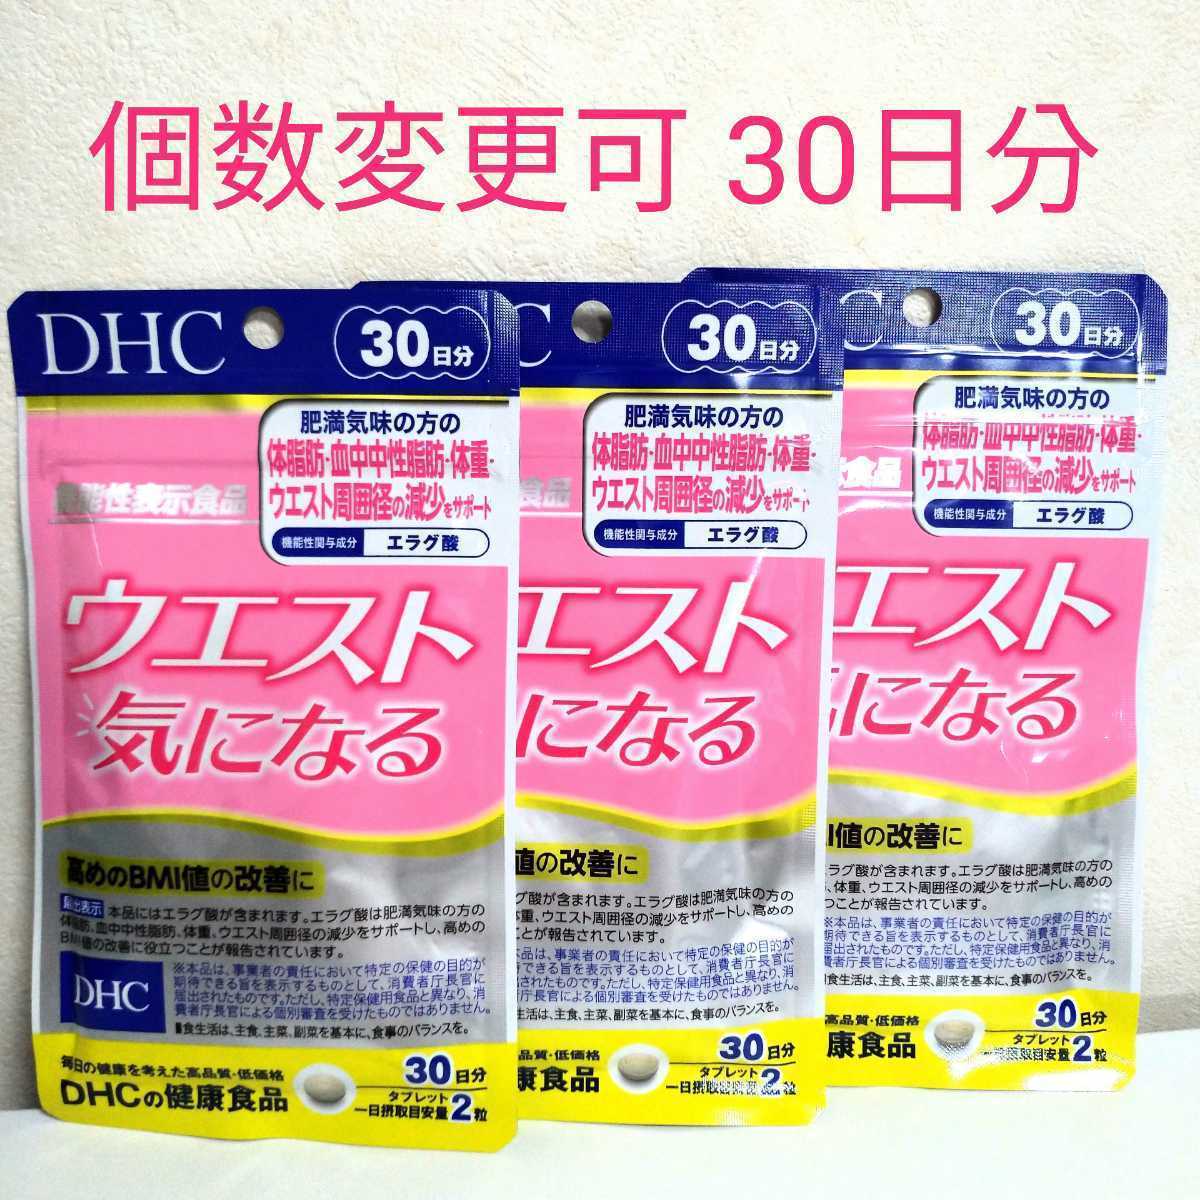 DHC ウエスト気になる30日分×10袋 個数変更可。